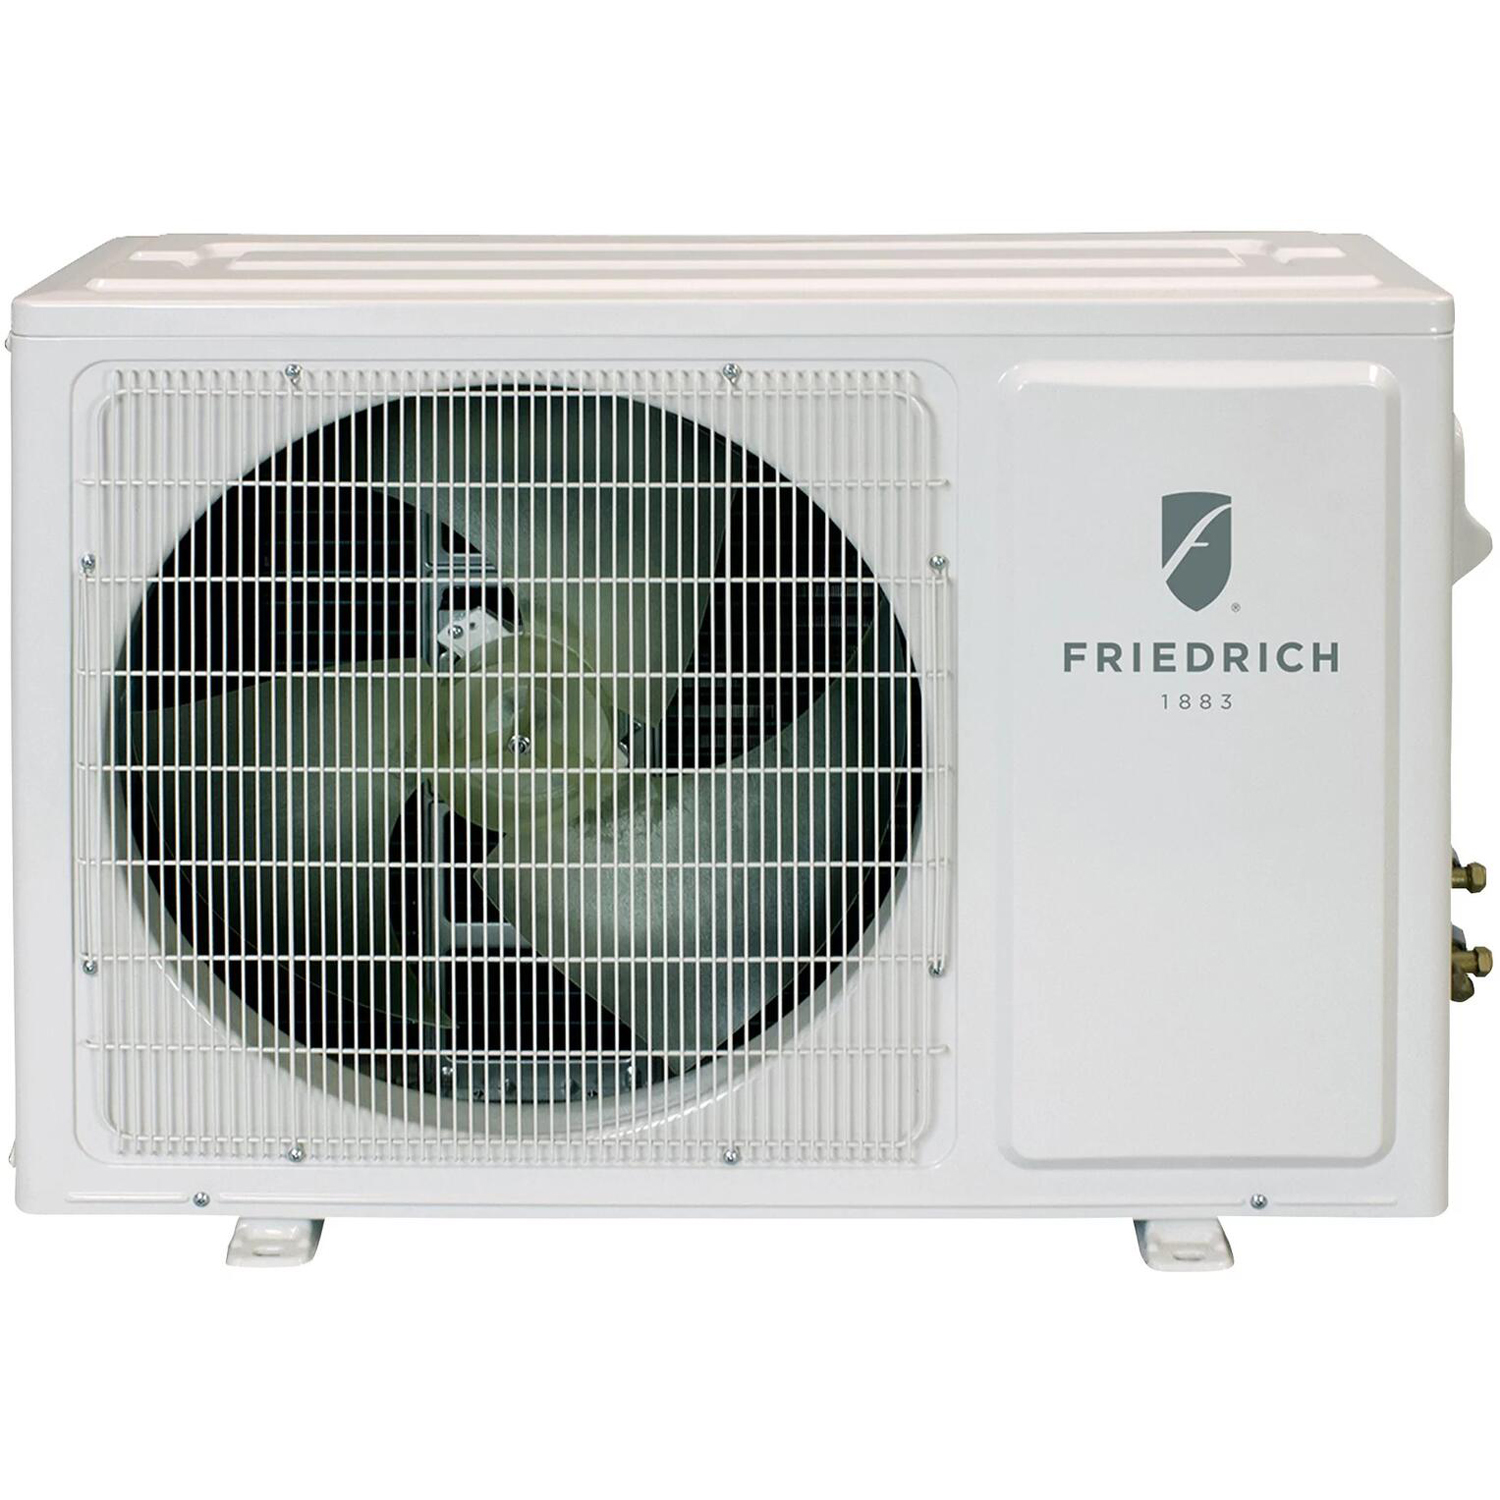 Photos - Other large household technique Friedrich Floating Air Select Outdoor 36000 BTU Air Conditioner and Heater 